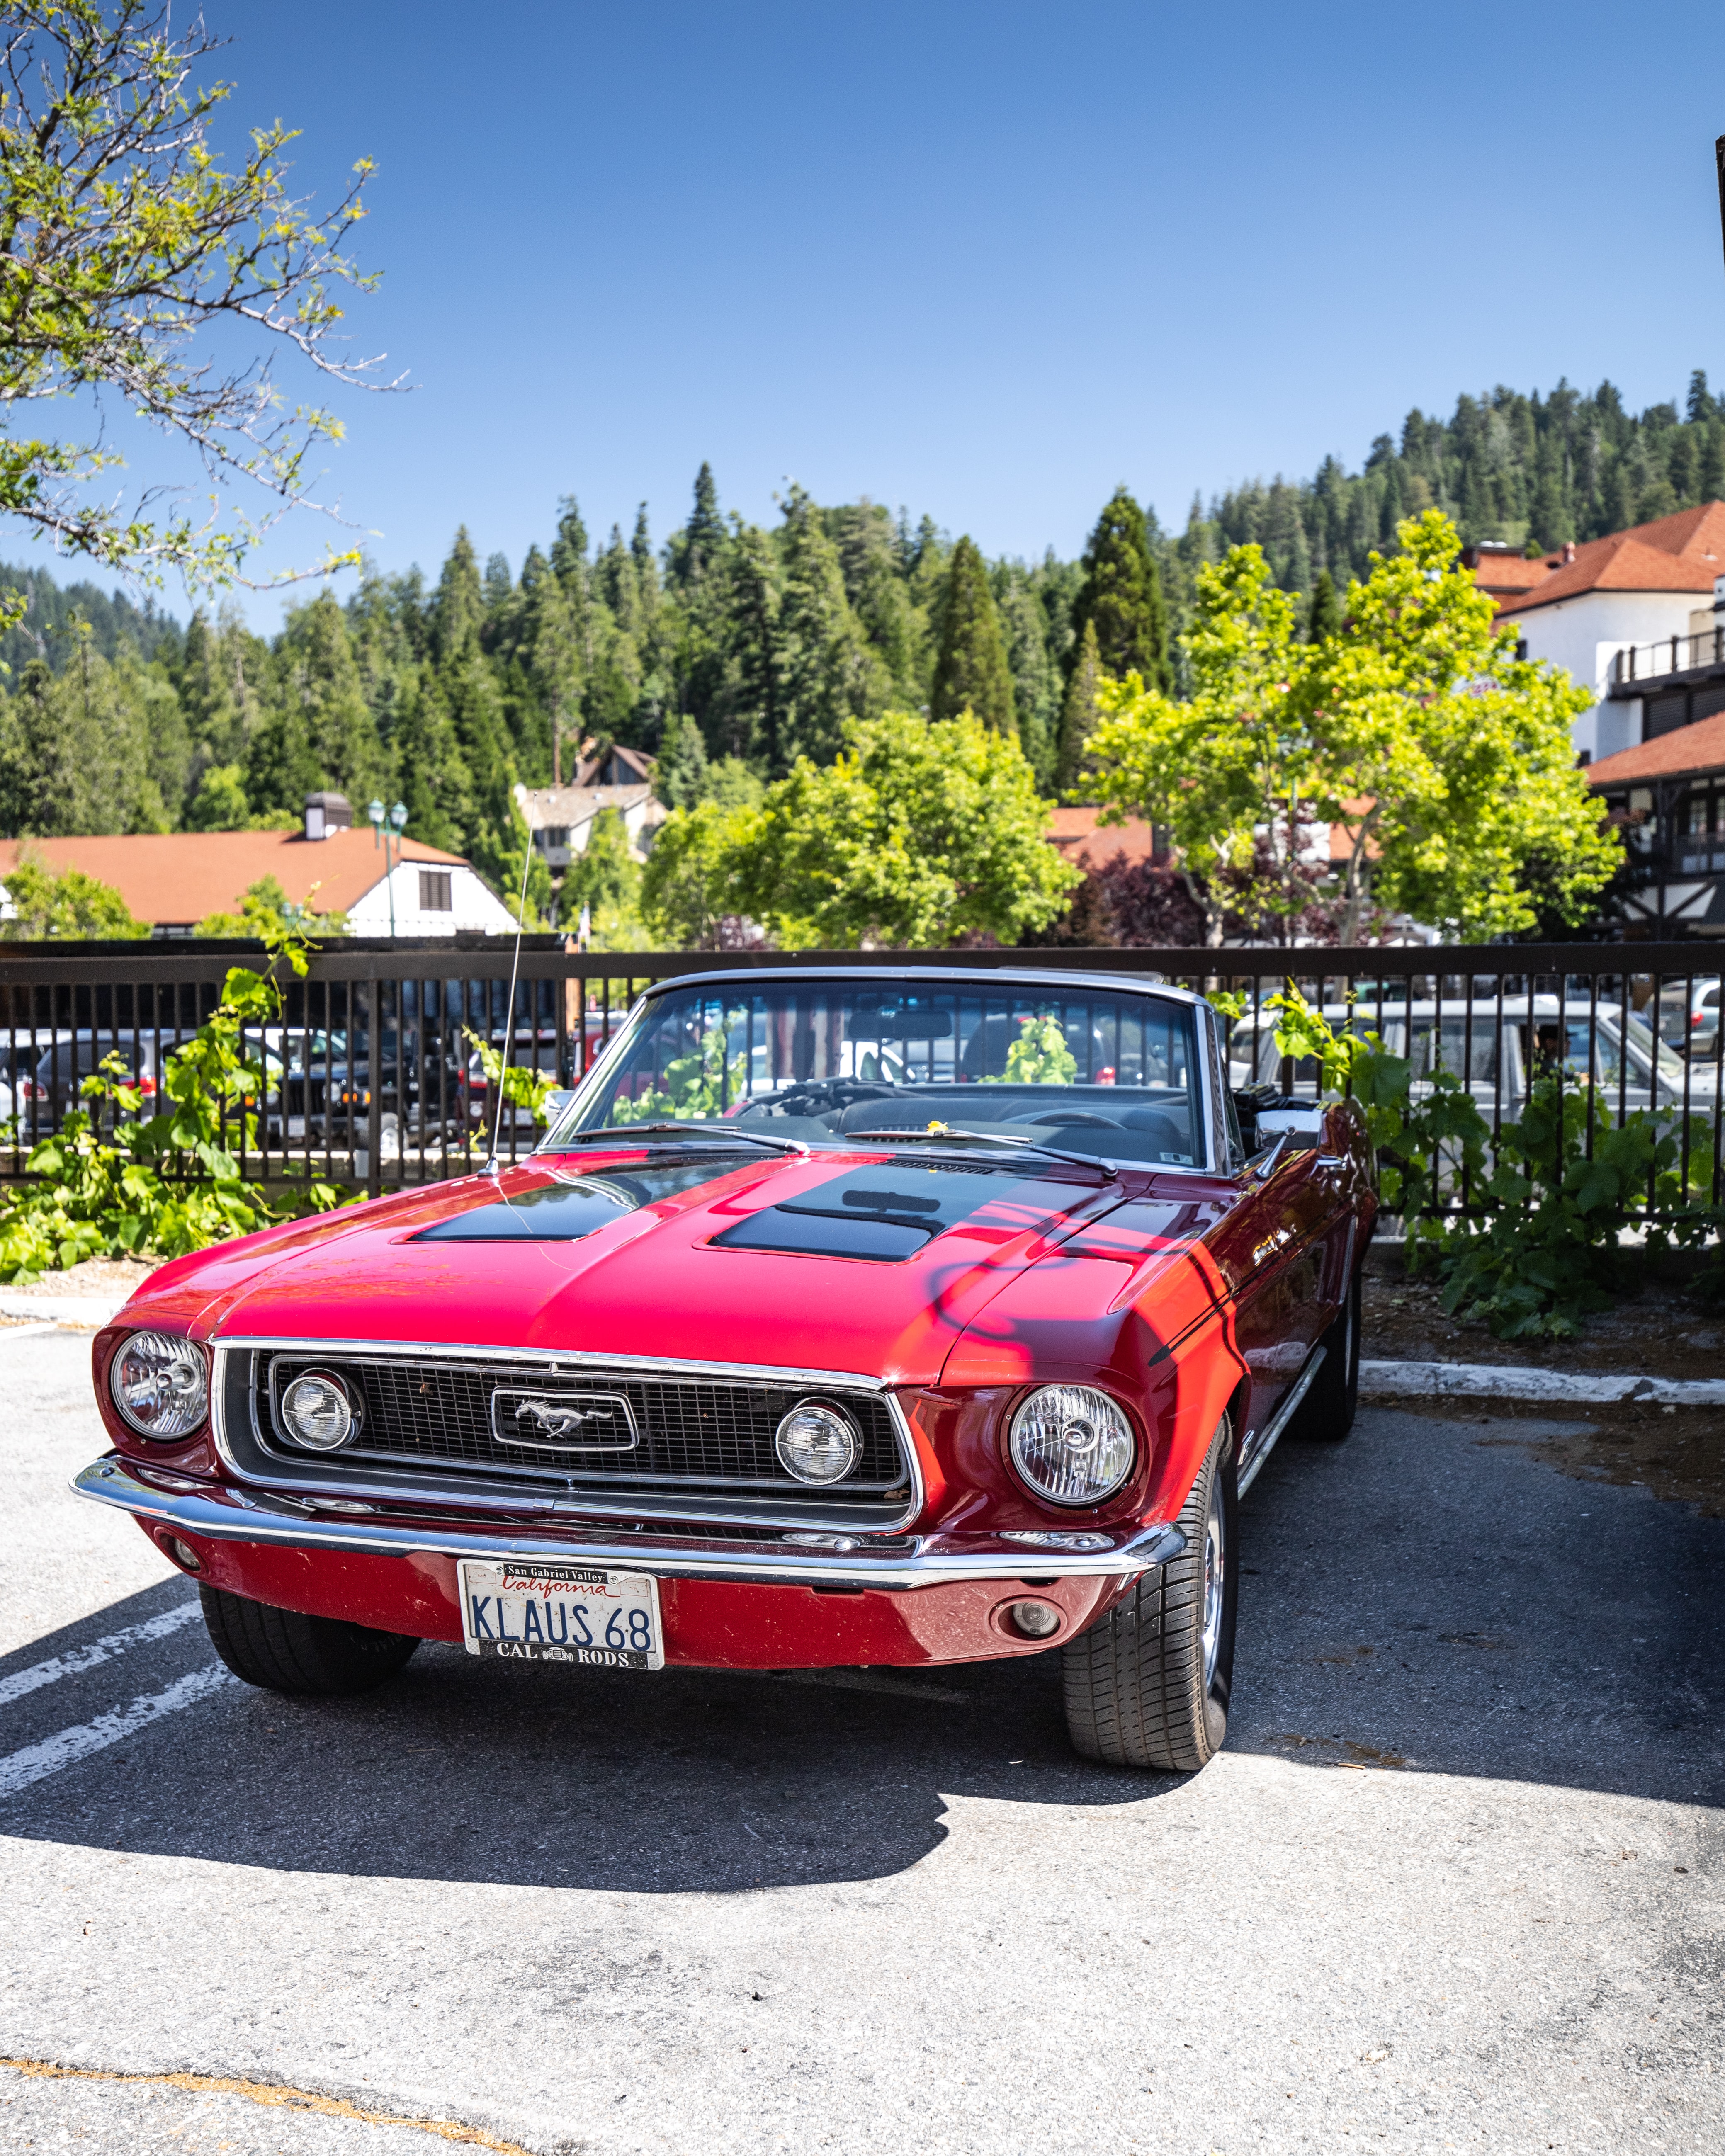 mustang, cars, lights, car, front view, headlights, retro